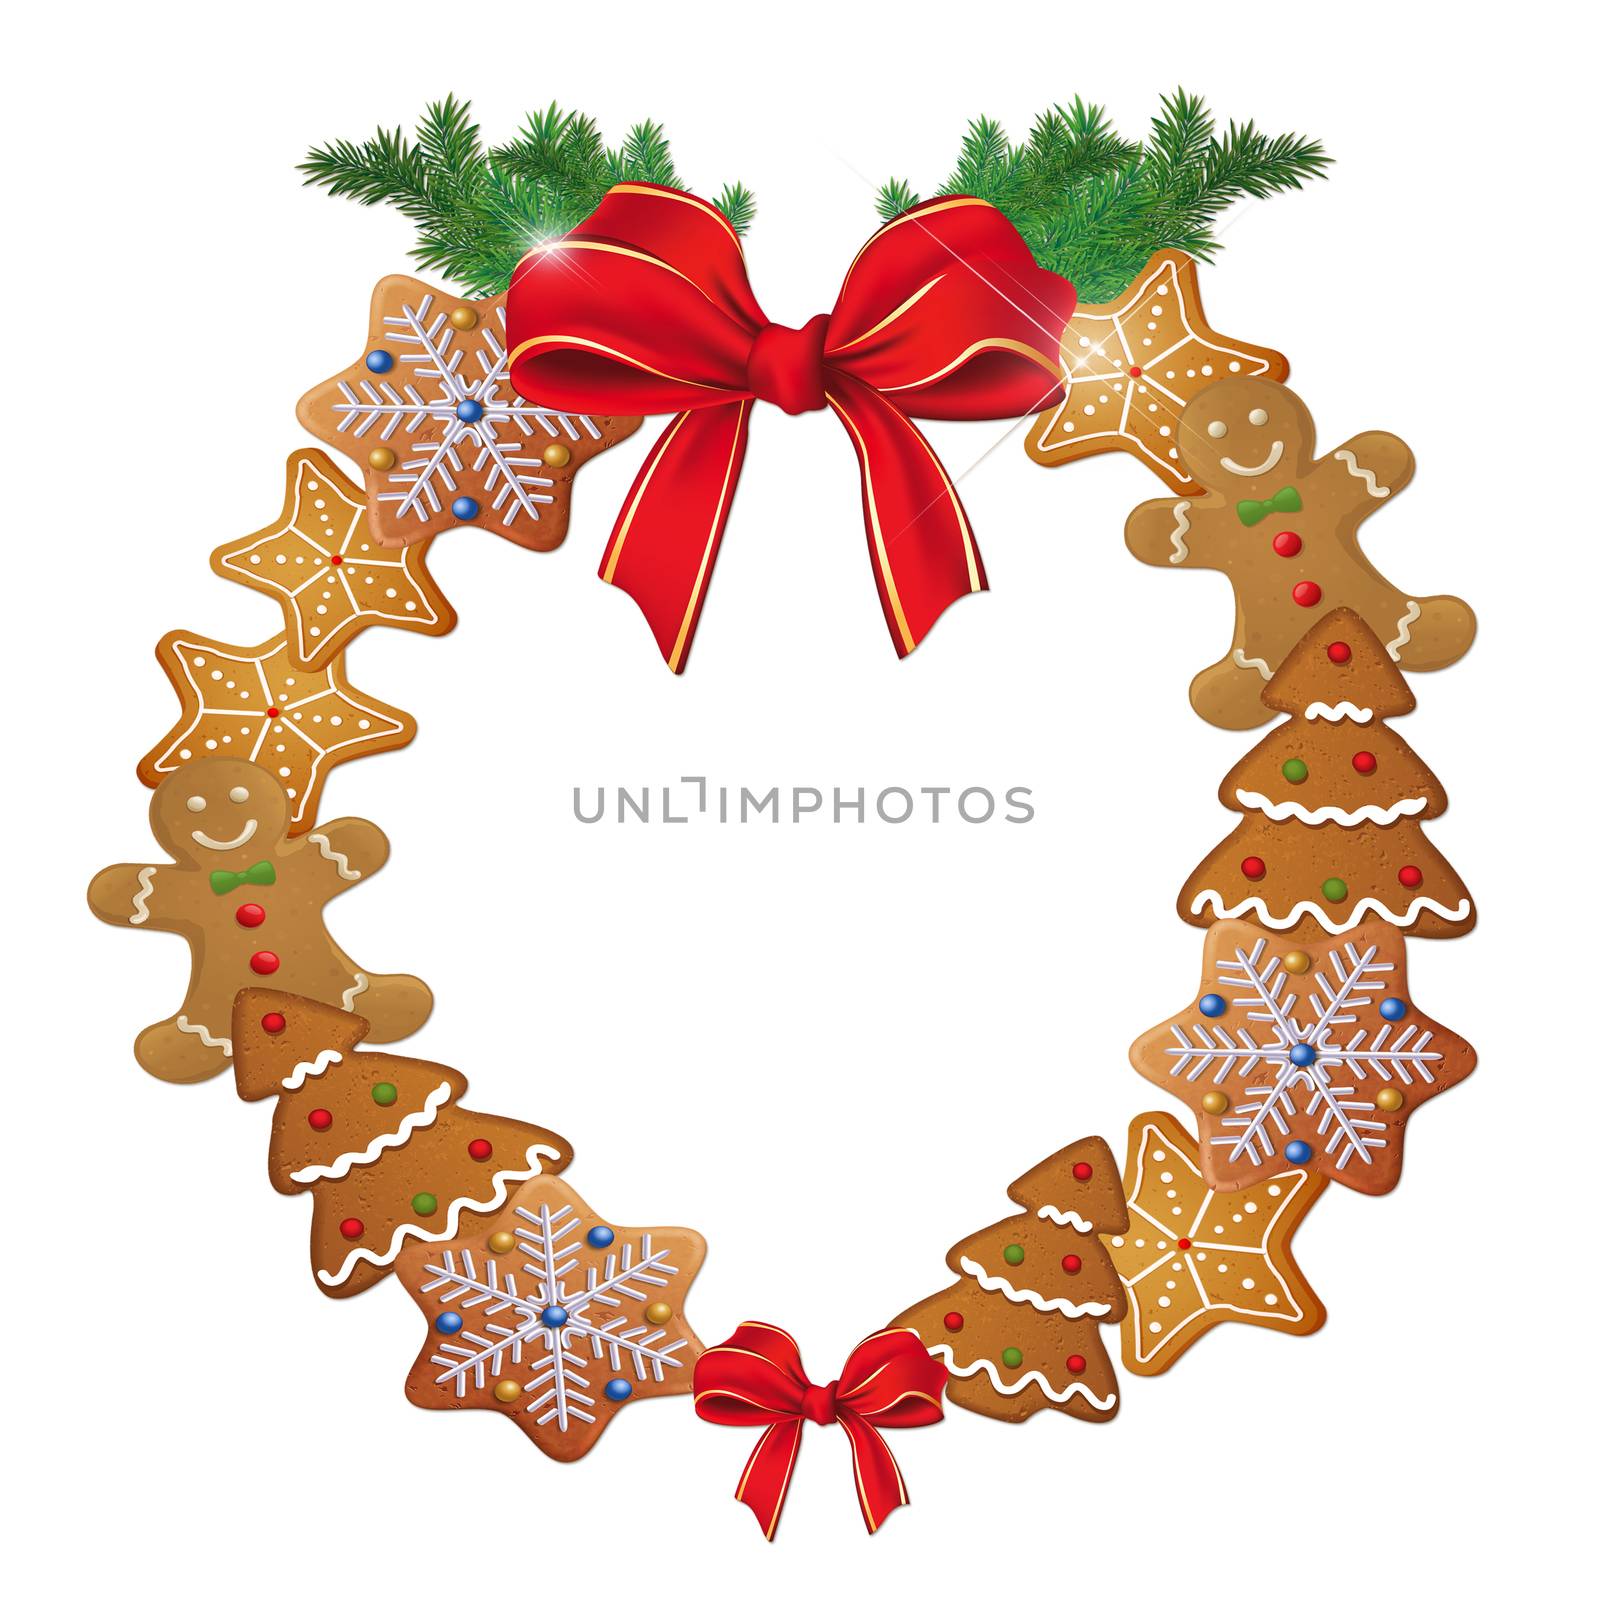 Illustration of Christmas wreath with cookies by GGillustrations